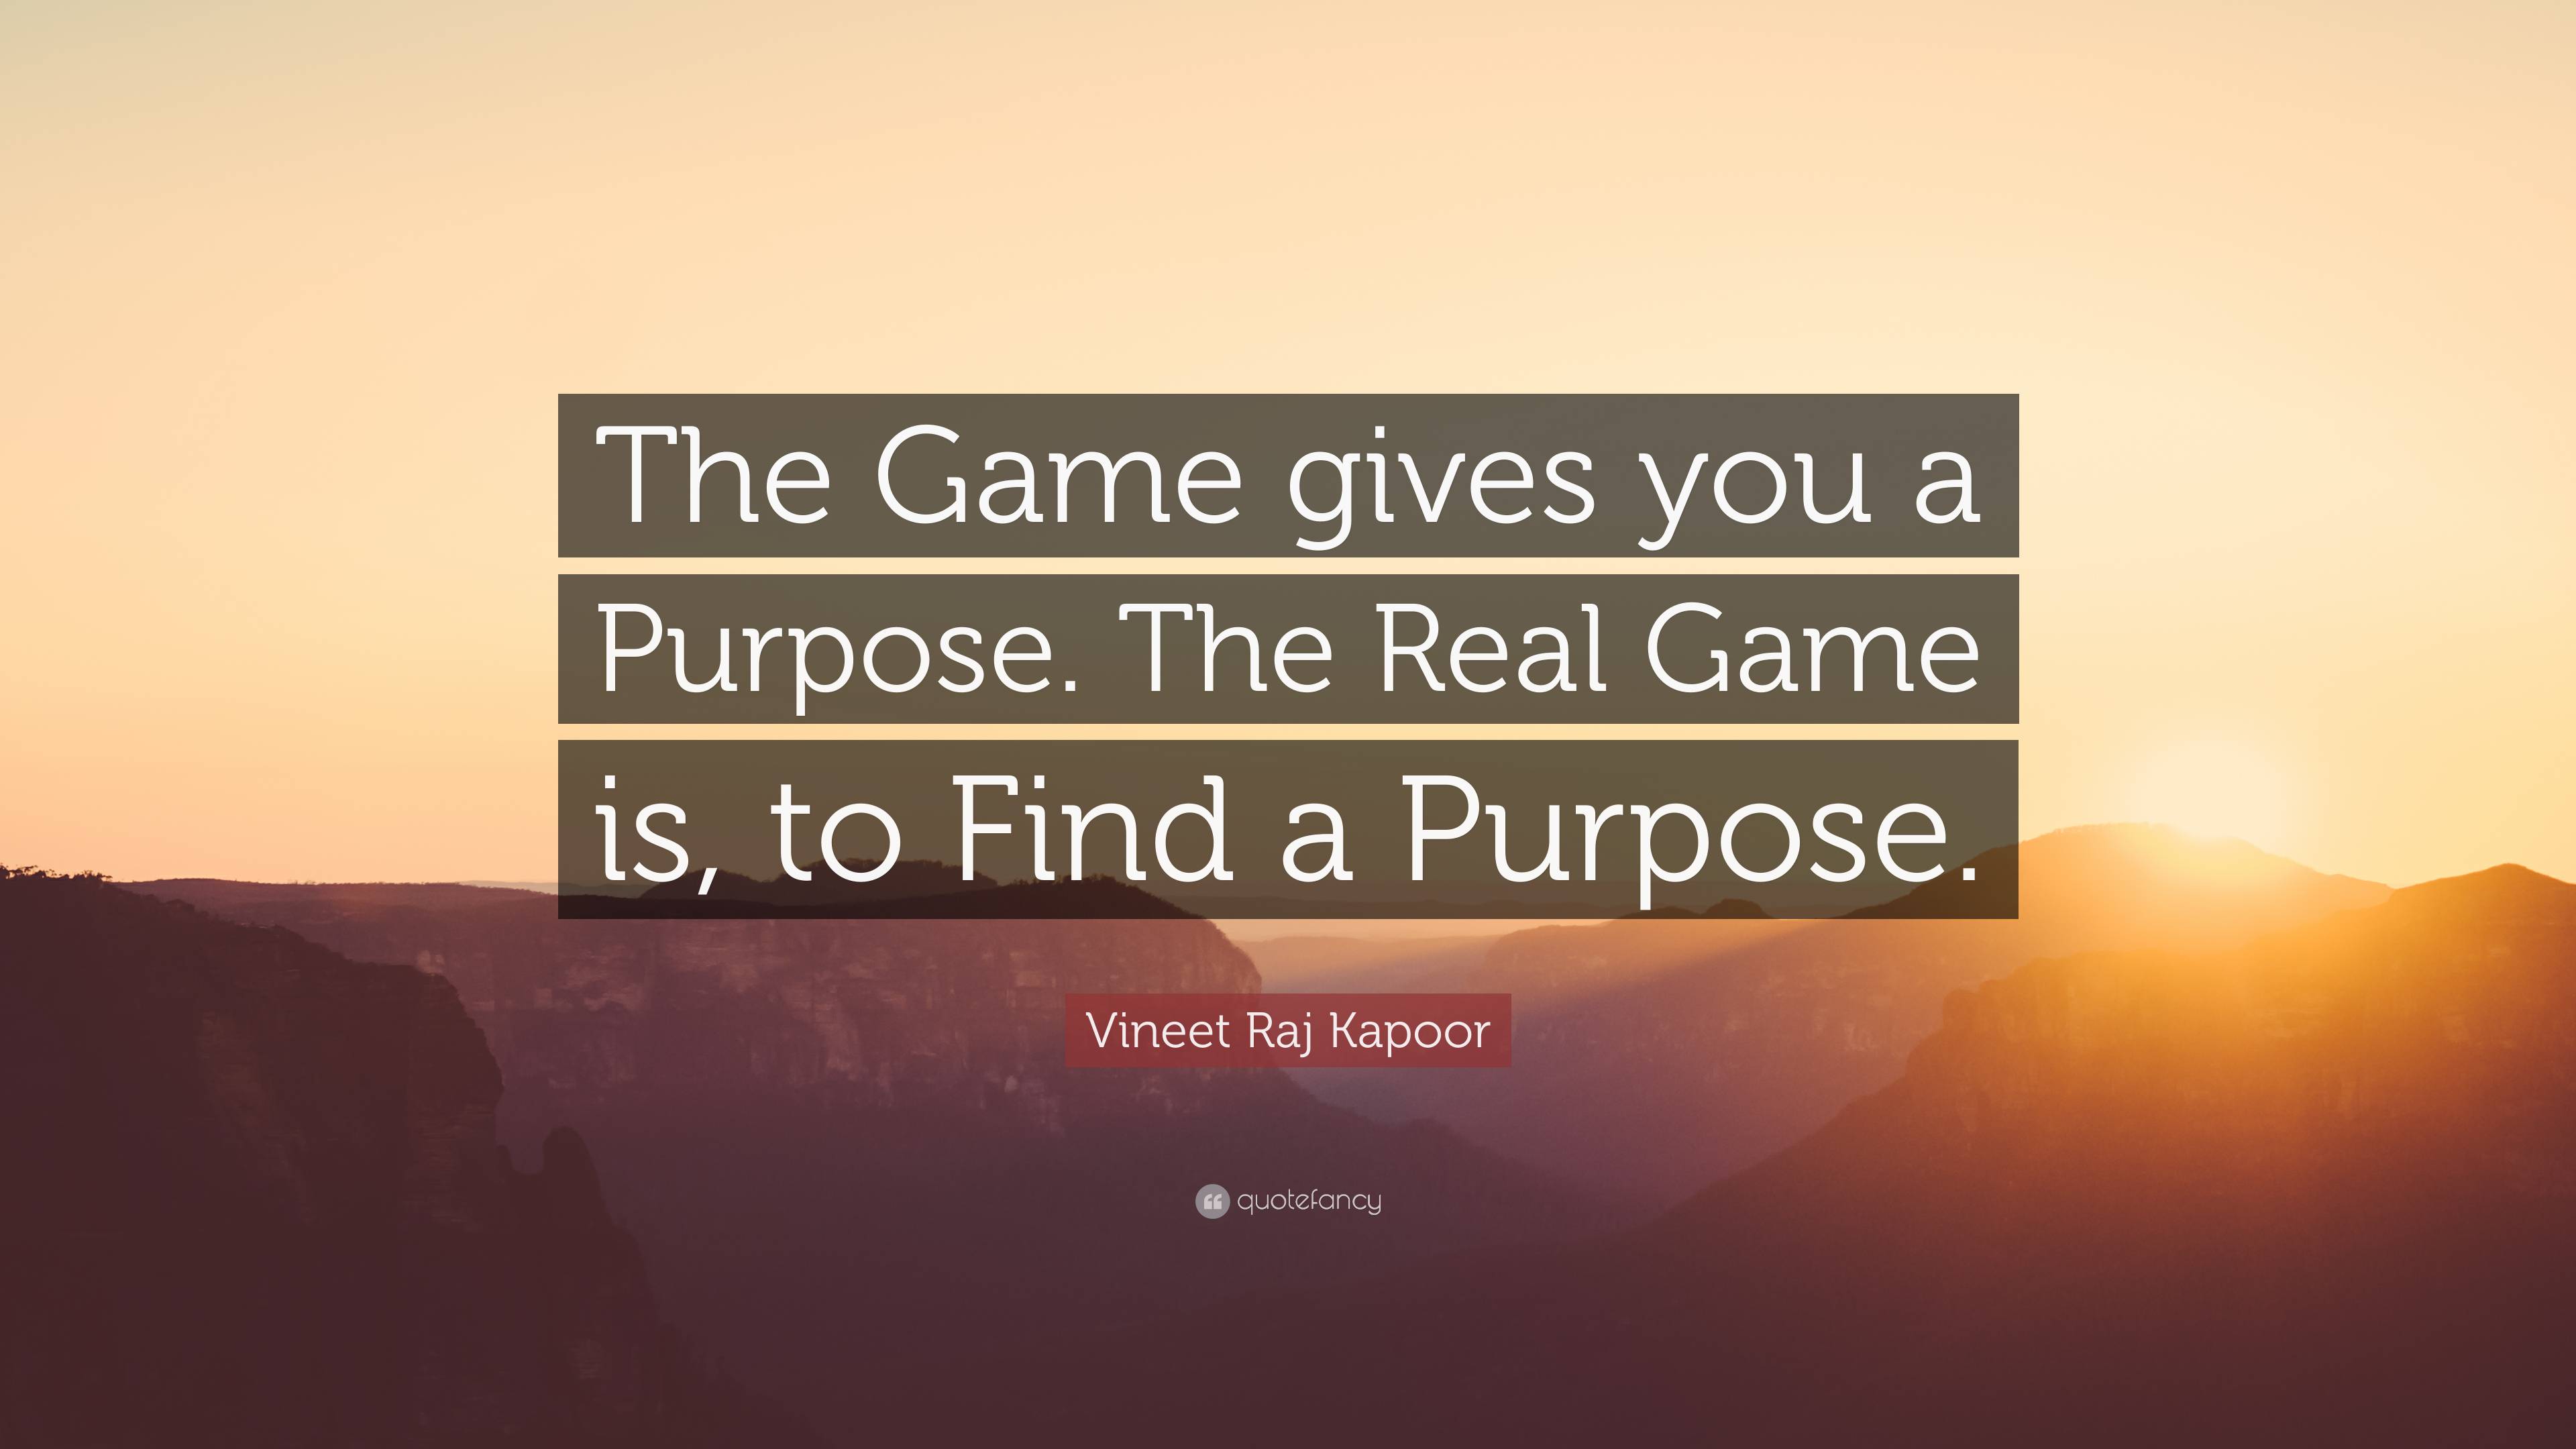 Vineet Raj Kapoor Quote: “The Game gives you a Purpose. The Real Game is,  to Find